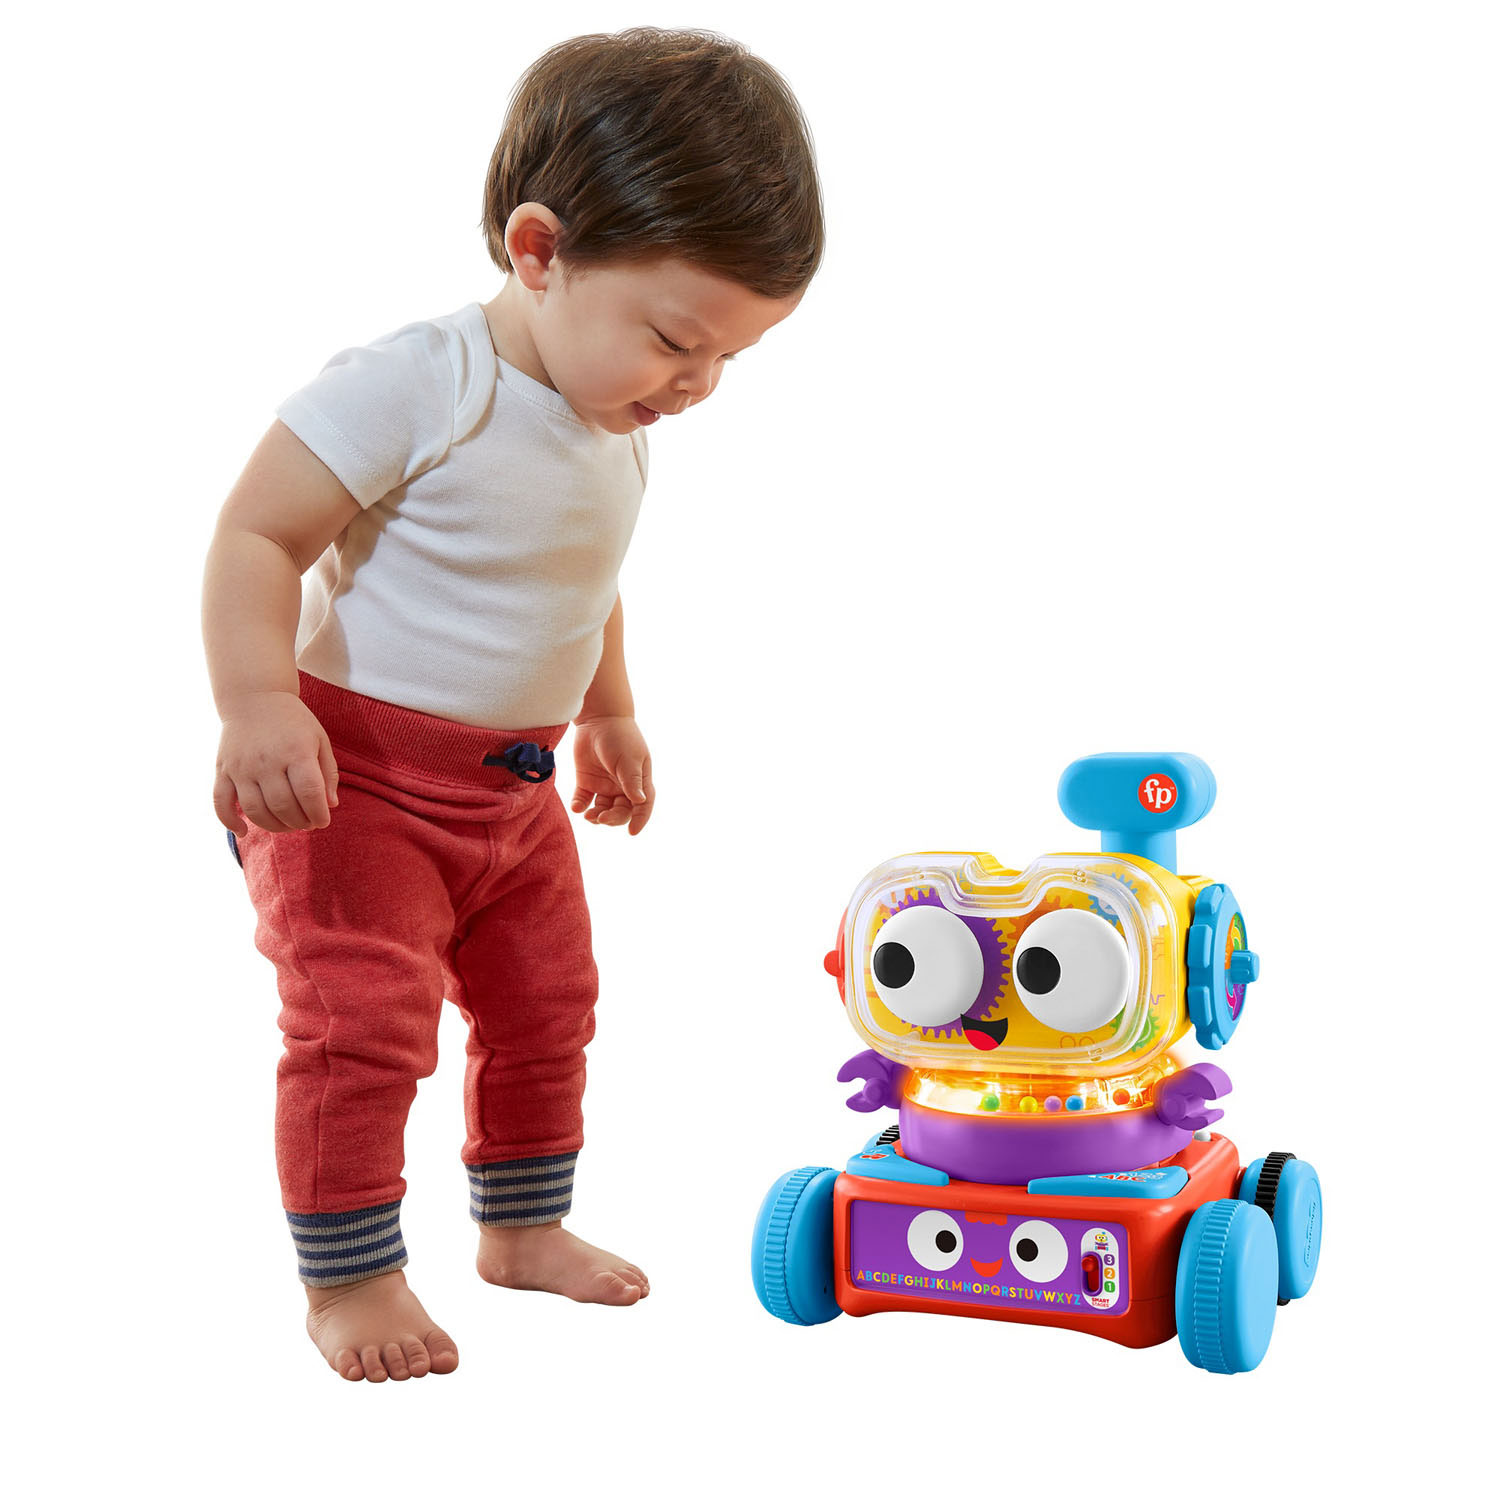 Fisher-Price 4-in-1 Learning Bot Interactive Toy Robot for Infants